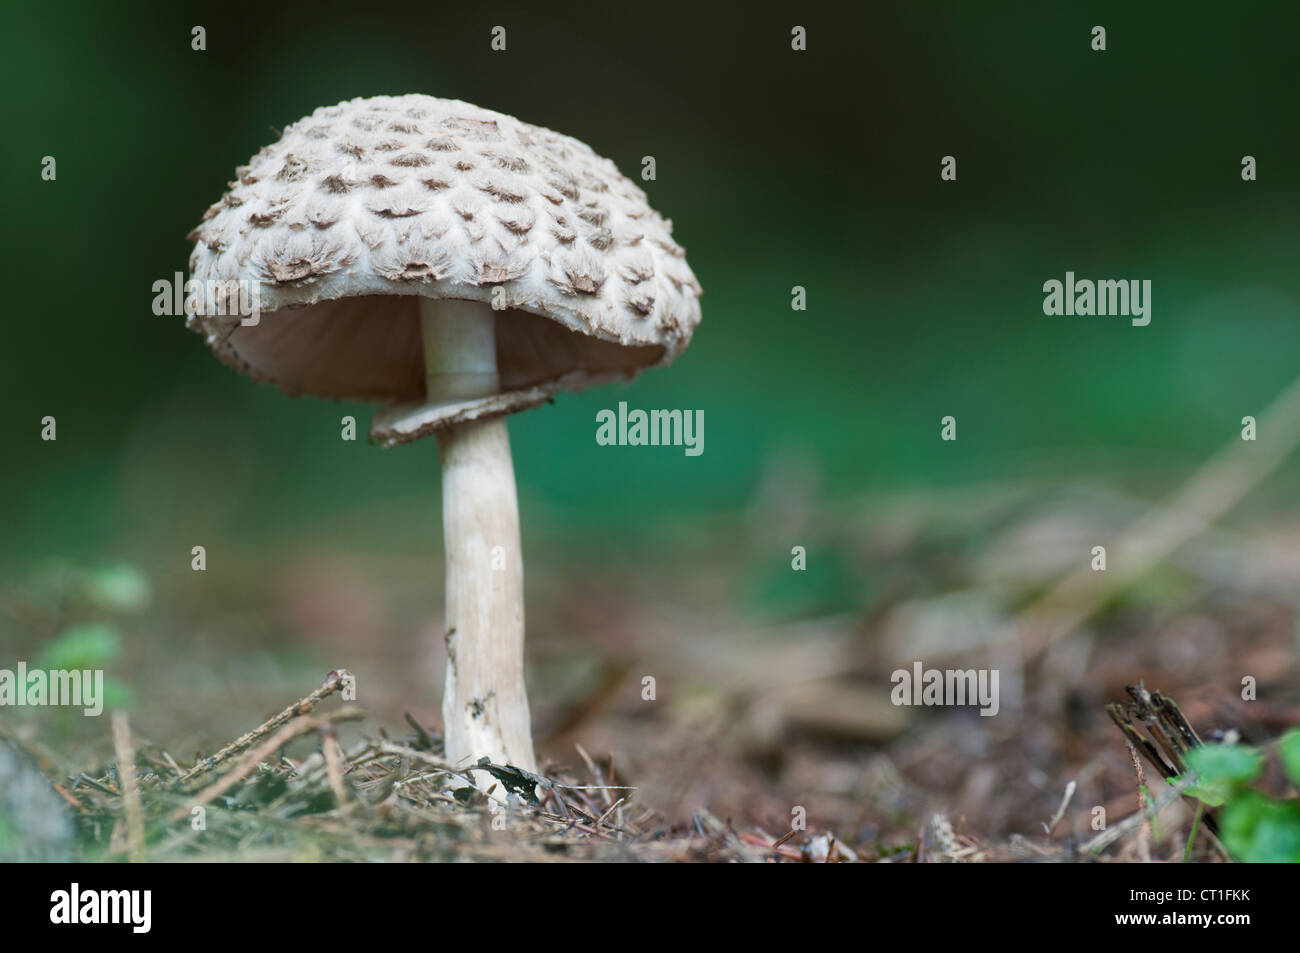 Shaggy Parasol (Cardinal rouge / Northern Cardinal rhacodes) champignons, Kent, Angleterre Banque D'Images